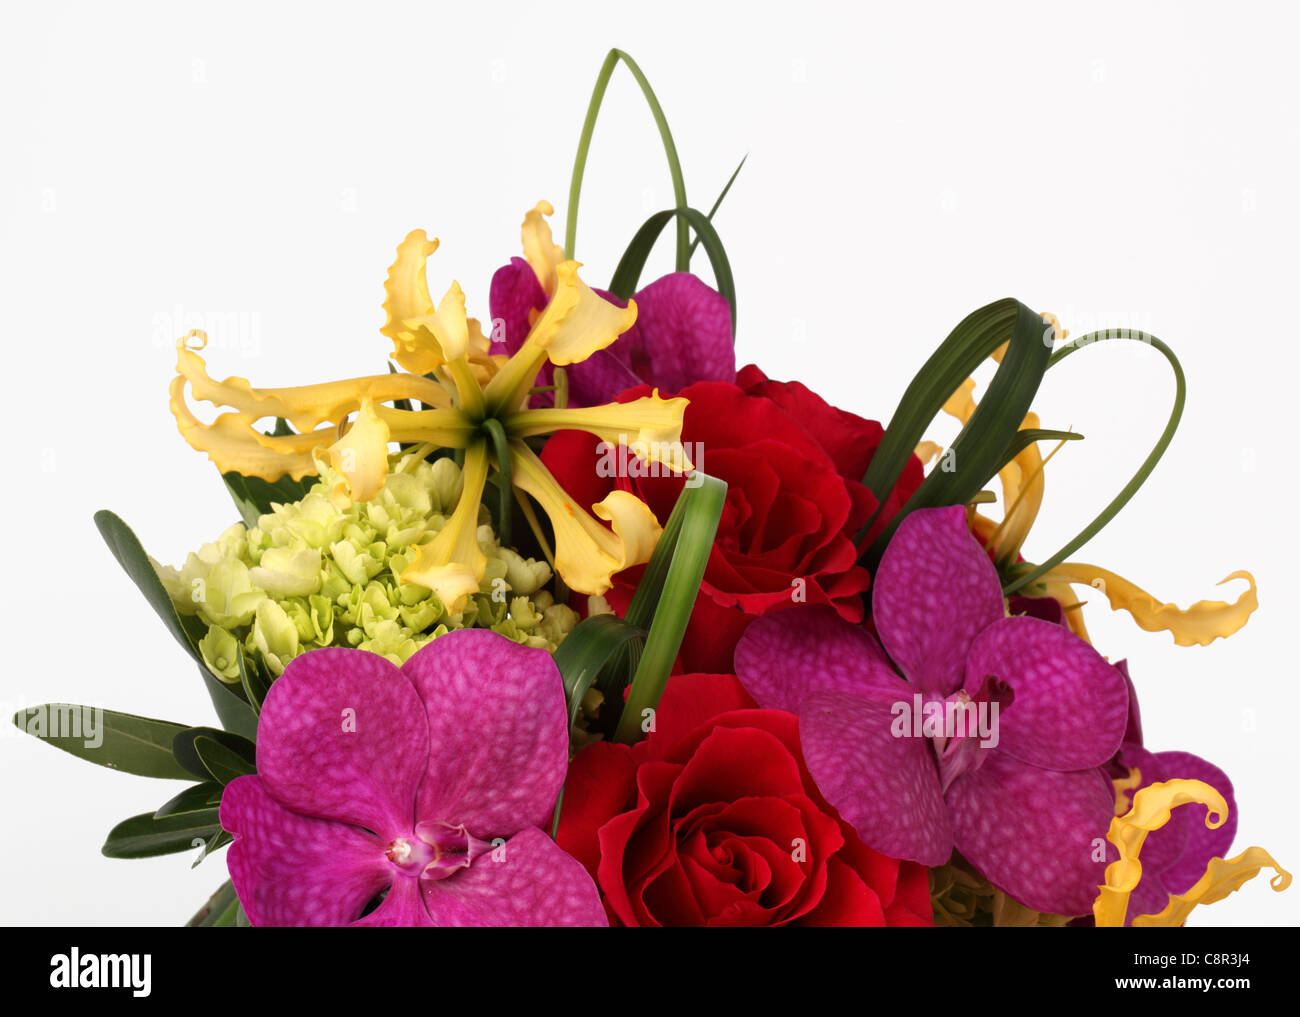 A close-up of a colorful bouquet of flowers. Red roses, cream hydrangea, yellow orchid [Laelia], purple orchid [Vanda] Stock Photo